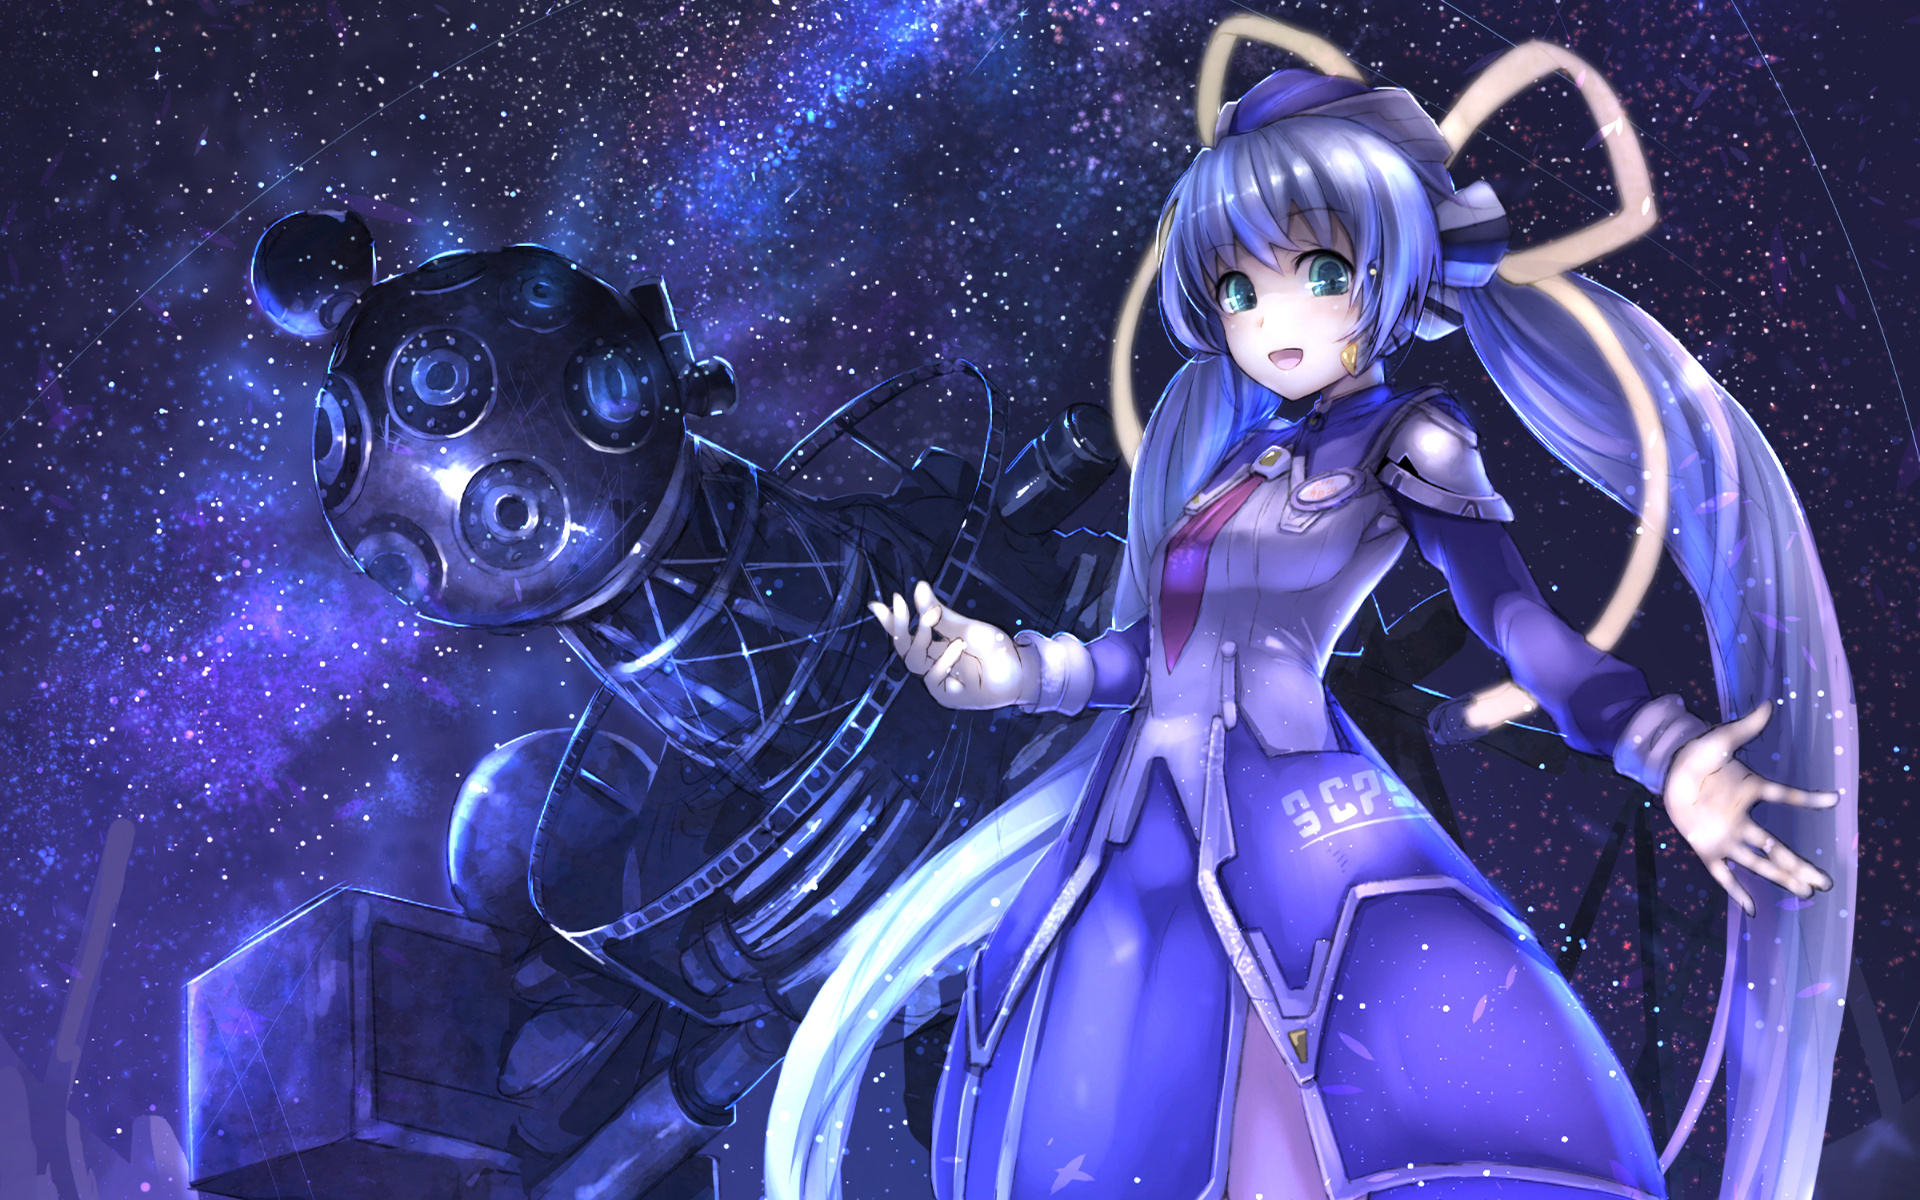 Anime Planetarian: The Reverie of a Little Planet HD Wallpaper by こるせ